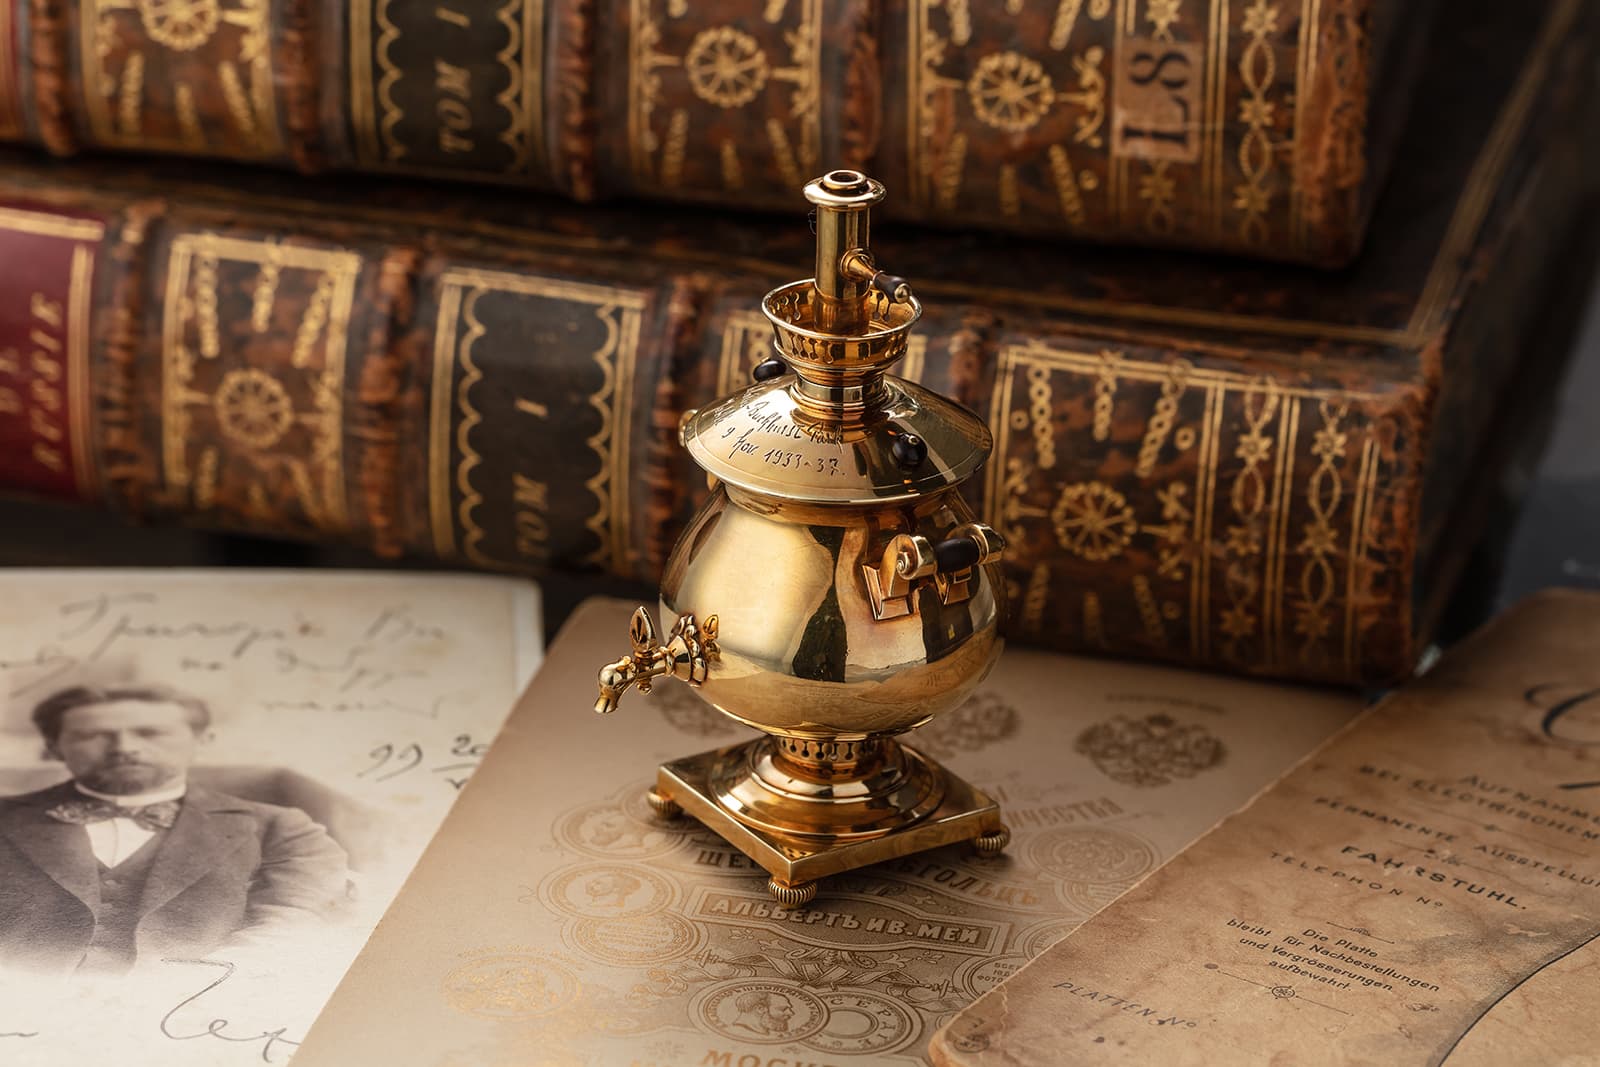 Fabergé gold table lighter in the form of a miniature samovar (circa. 1908-1917), part of the Harry Woolf collection of Fabergé pieces to be sold by Christie’s London in November 2021